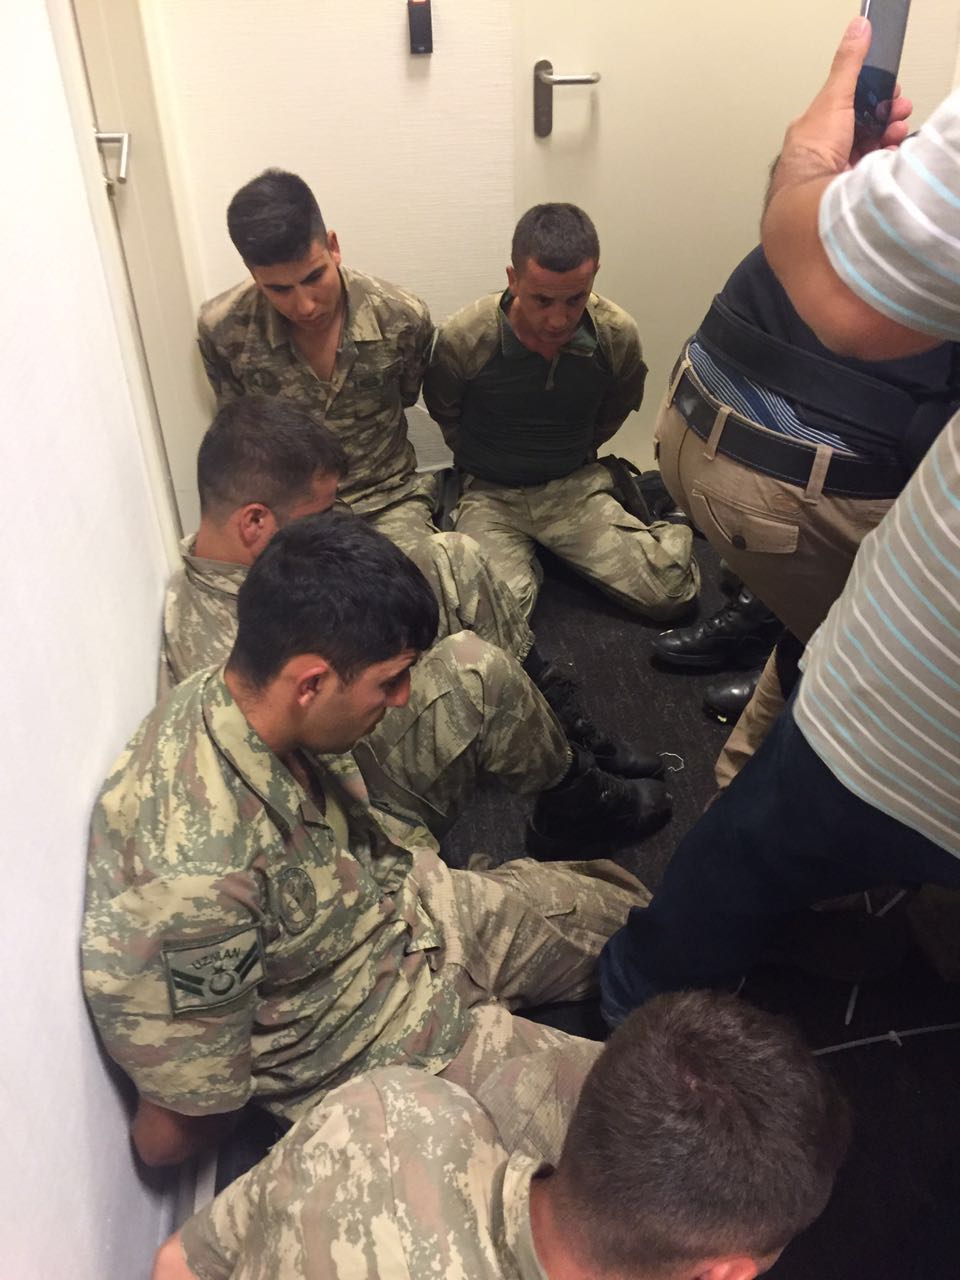 Thirteen soldiers, including three officers who were FETÖ members trying to raid the National Intelligence Organization (MİT) simultaneously with the attack on the Presidential Palace complex, were taken into custody.